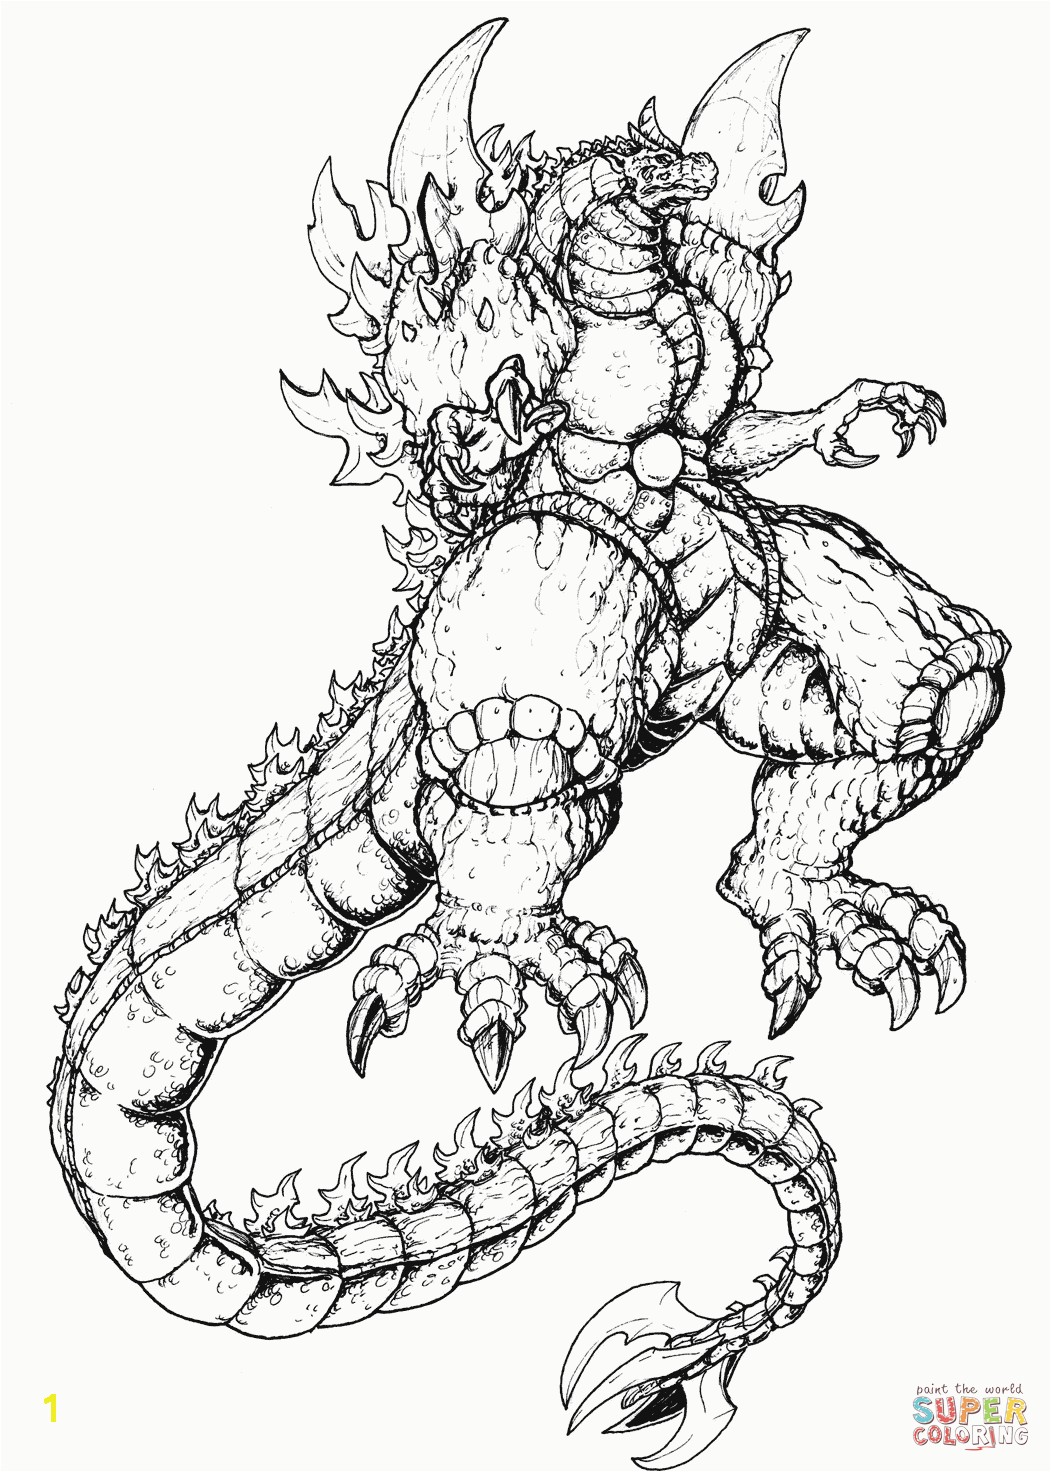 the Super Godzilla coloring pages to view printable version or color it online patible with iPad and Android tablets